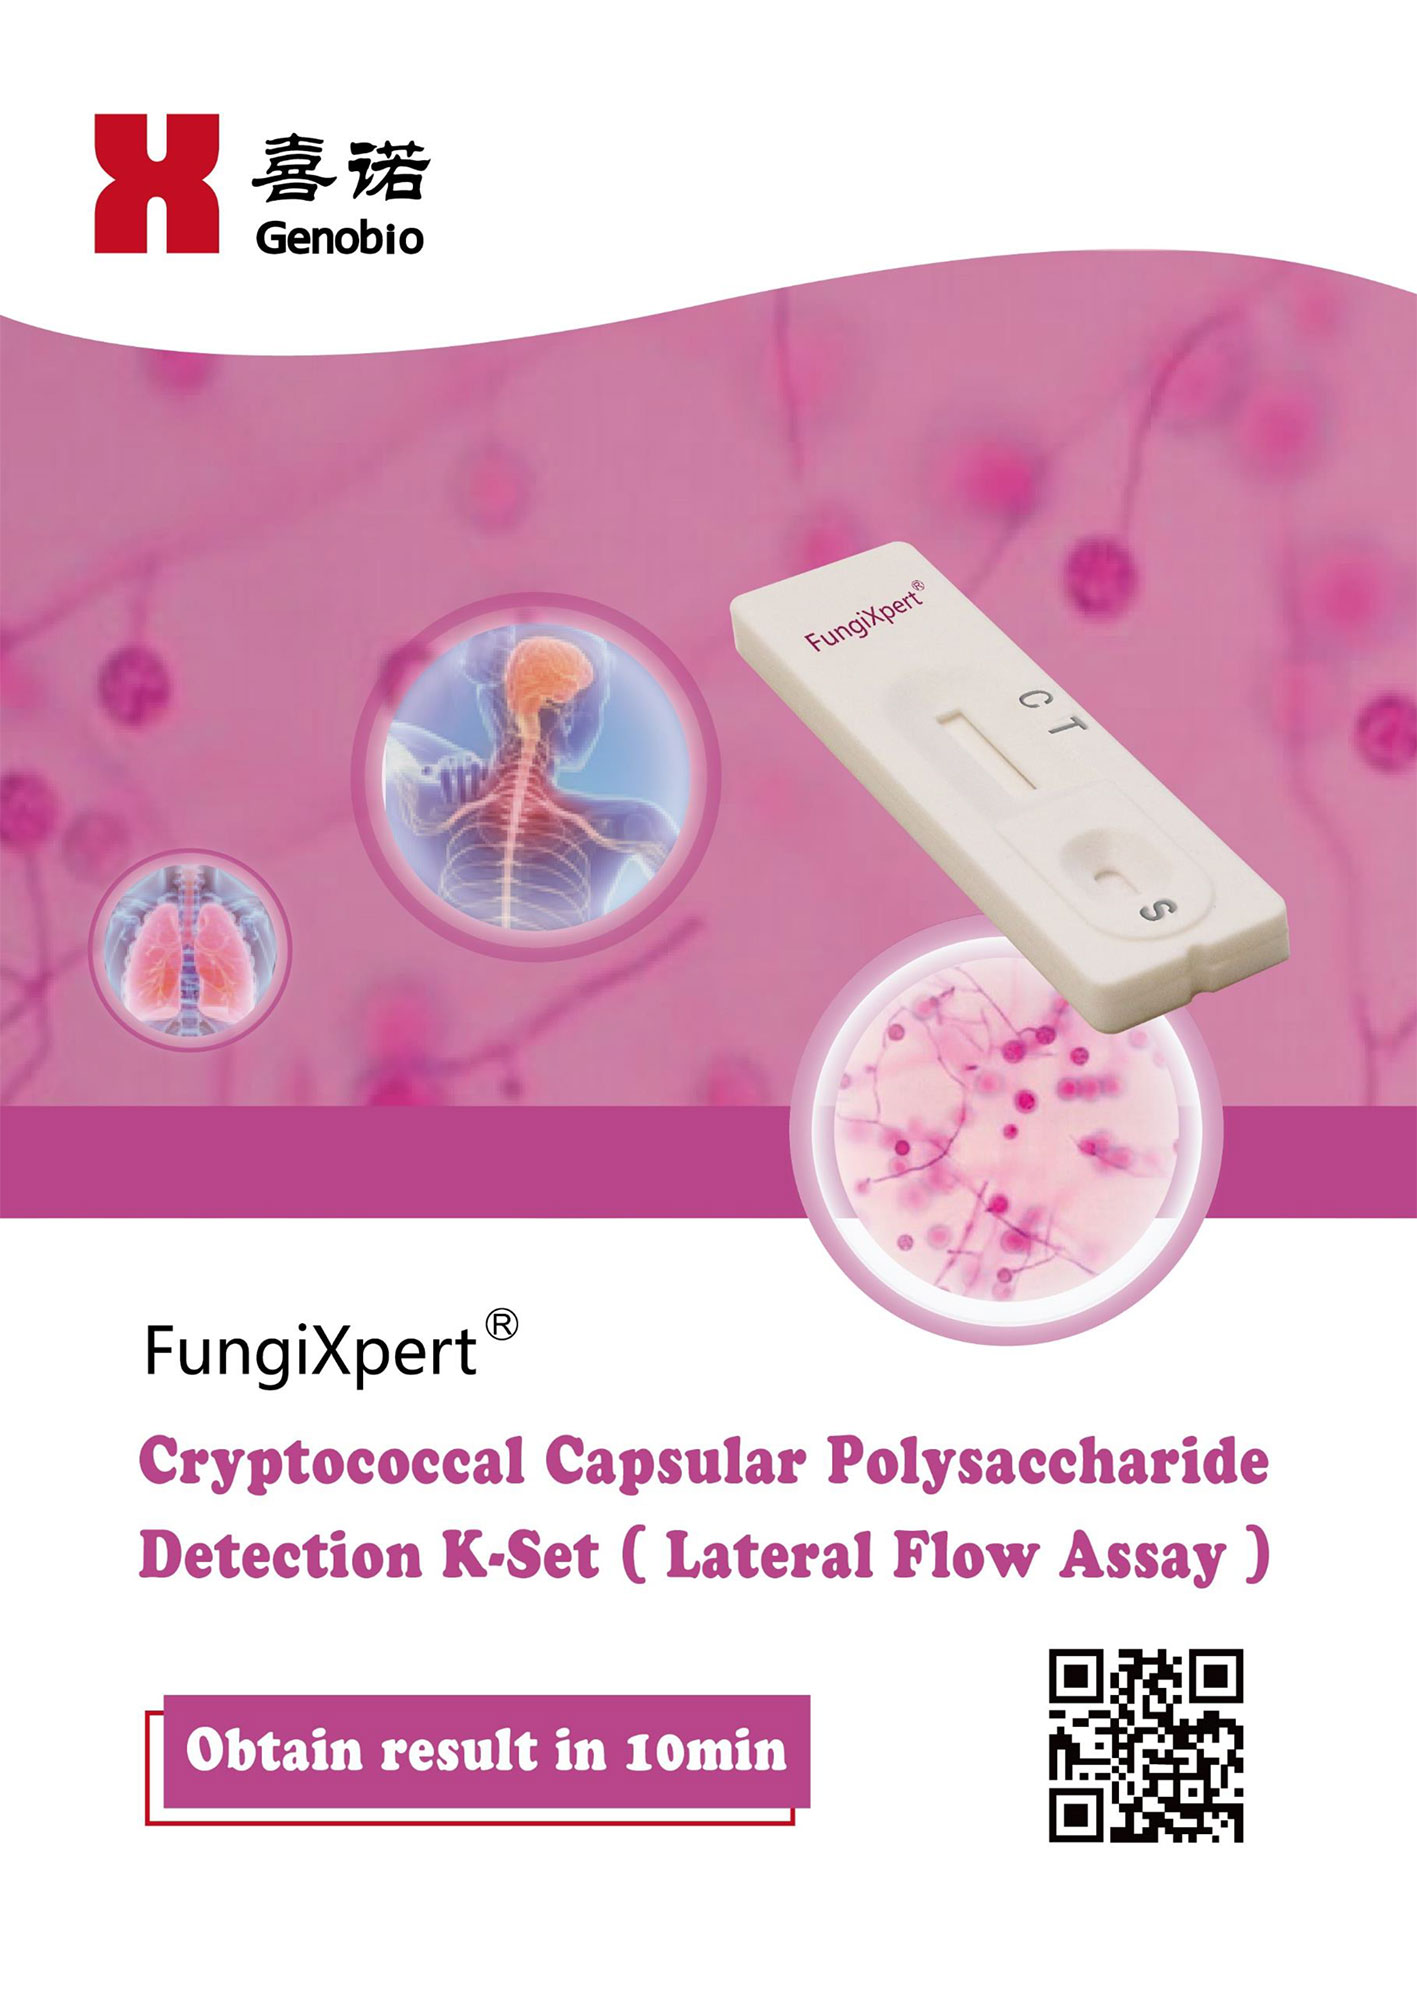 FungiXpert® Cryptococcal Capsular Polysaccharide Detection K-Set (Lateral Flow Assay)